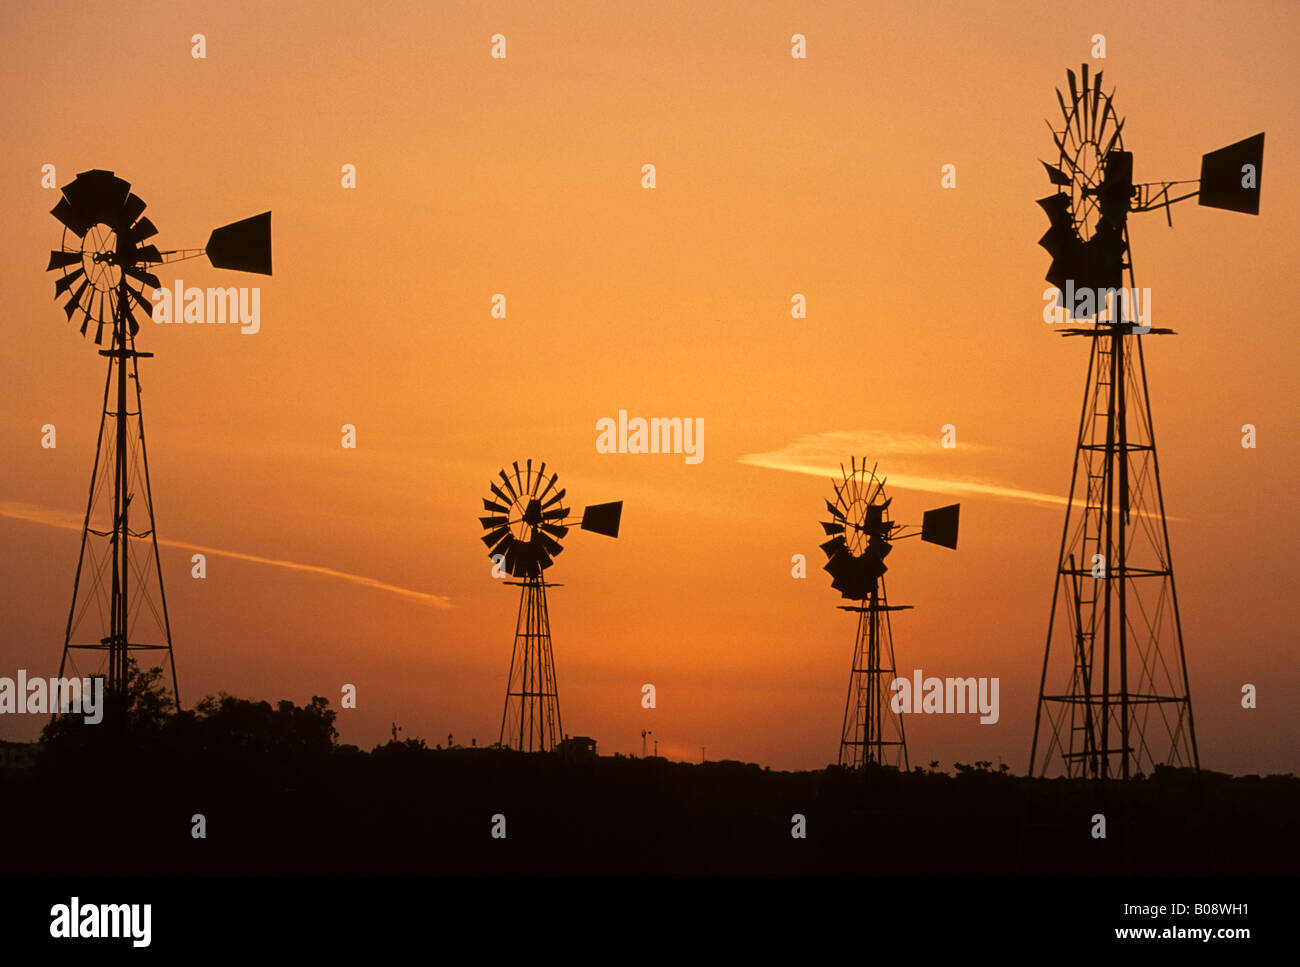 Wind driven water pumps silhouetted against evening sunset sky near Protaras, Cyprus Stock Photo